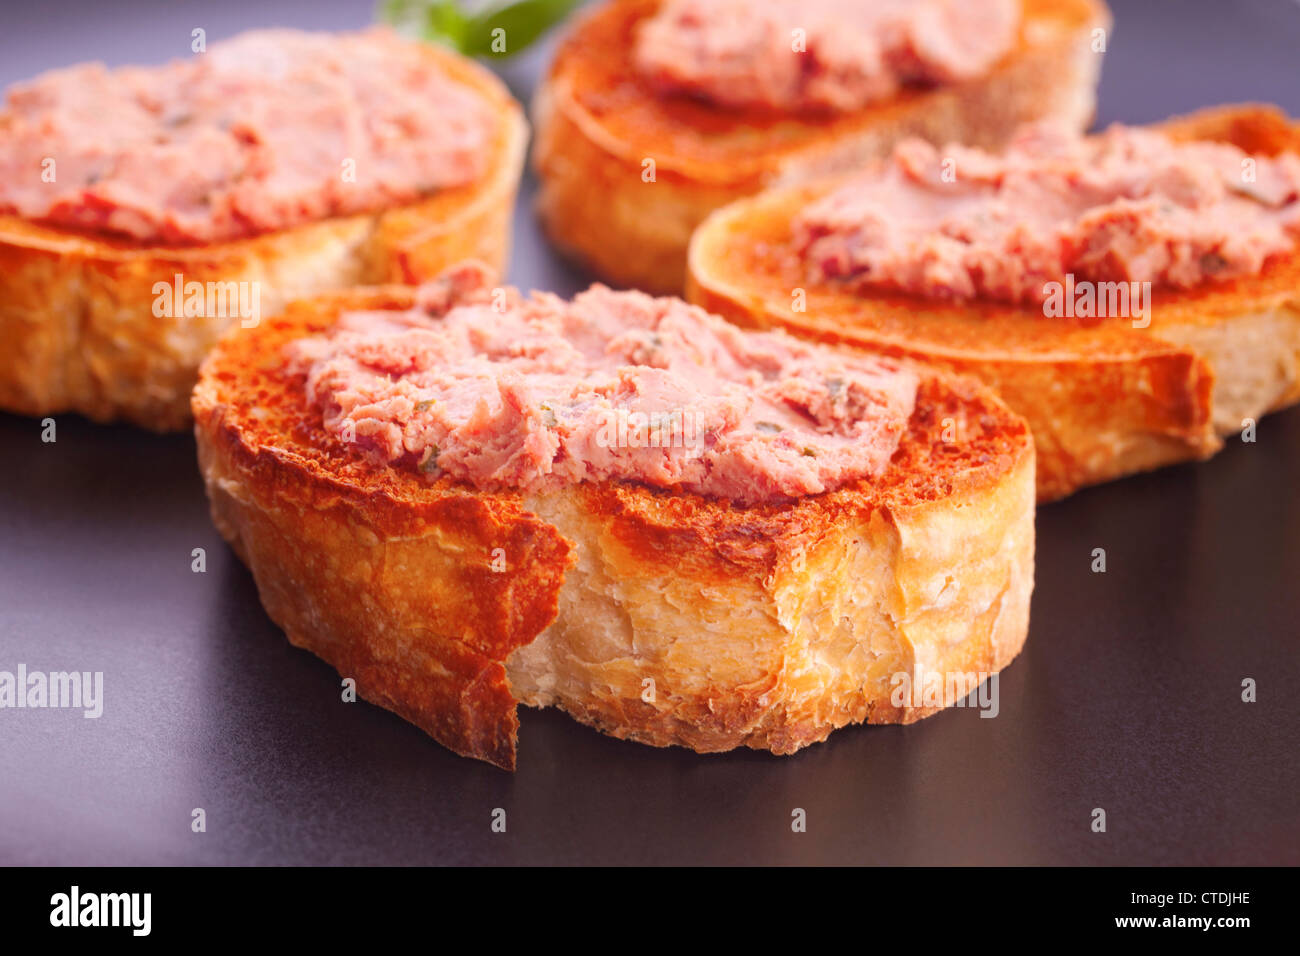 Pate on toasted baguette, on a black plate. Stock Photo